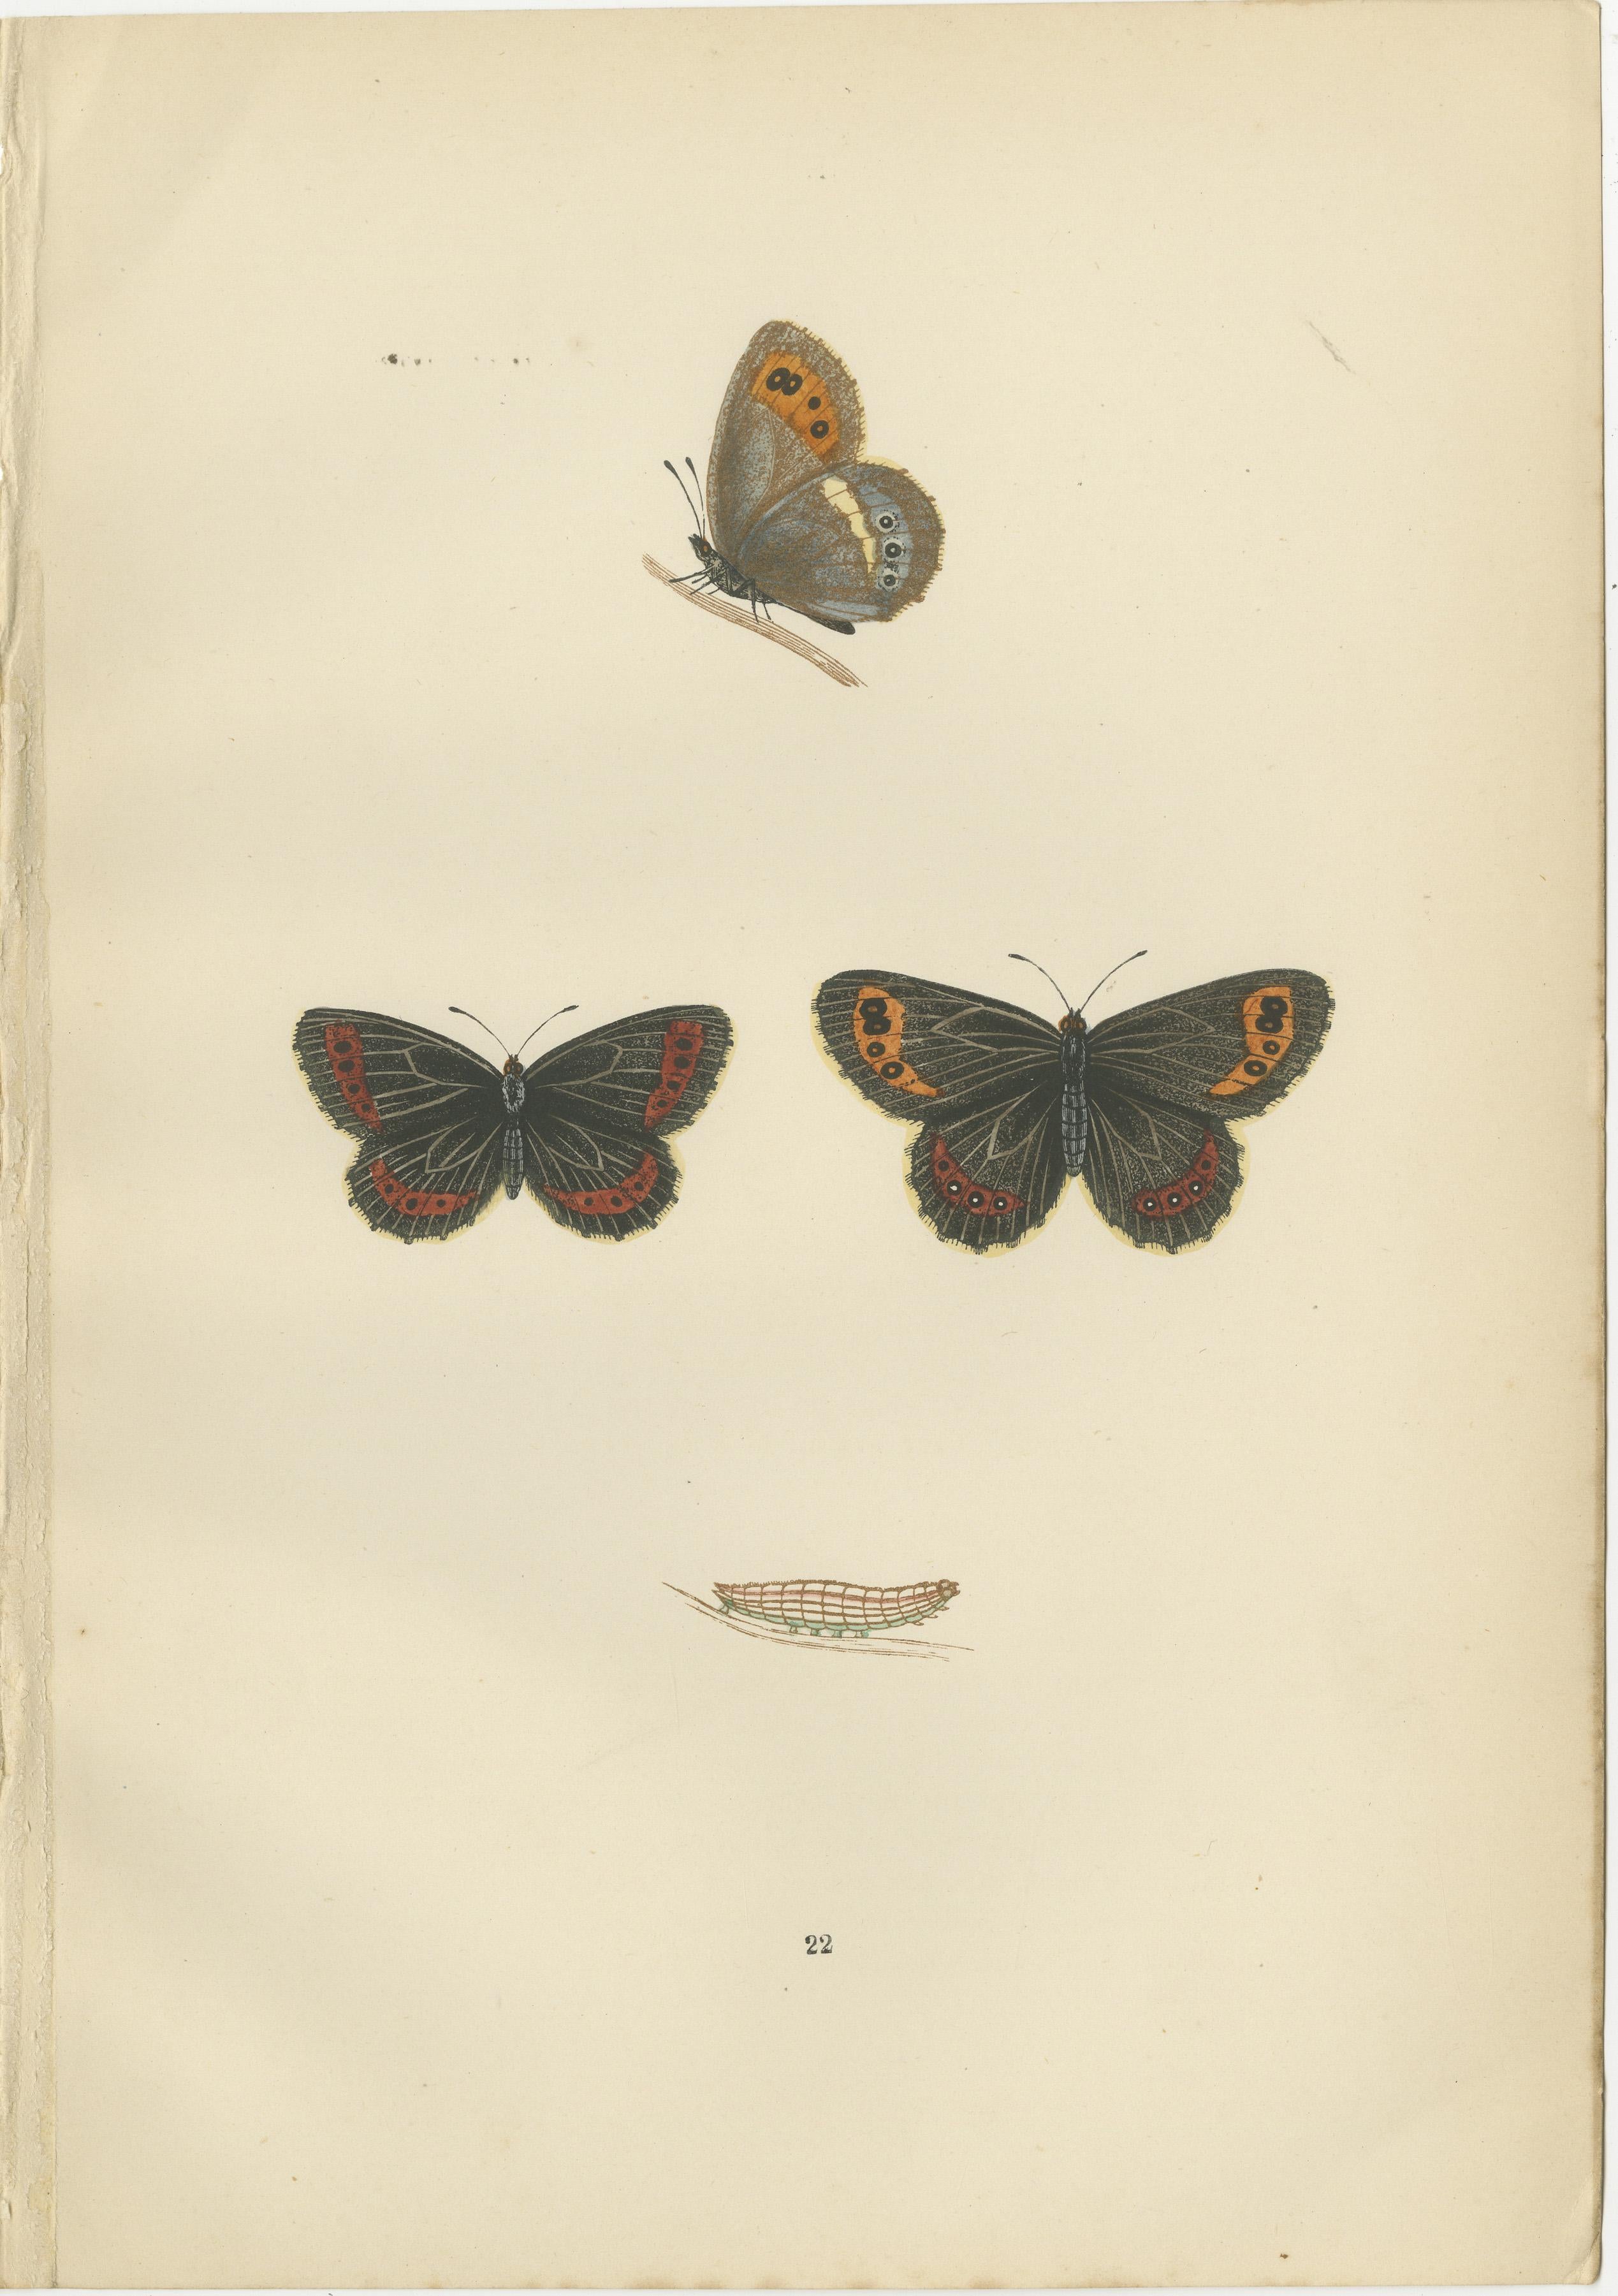 The butterflies depicted in the plates are special, both historically in the context of British lepidopterology and scientifically in terms of their morphology and behavior.

1. **Arran Brown (Erebia ligea)** - The image labeled 